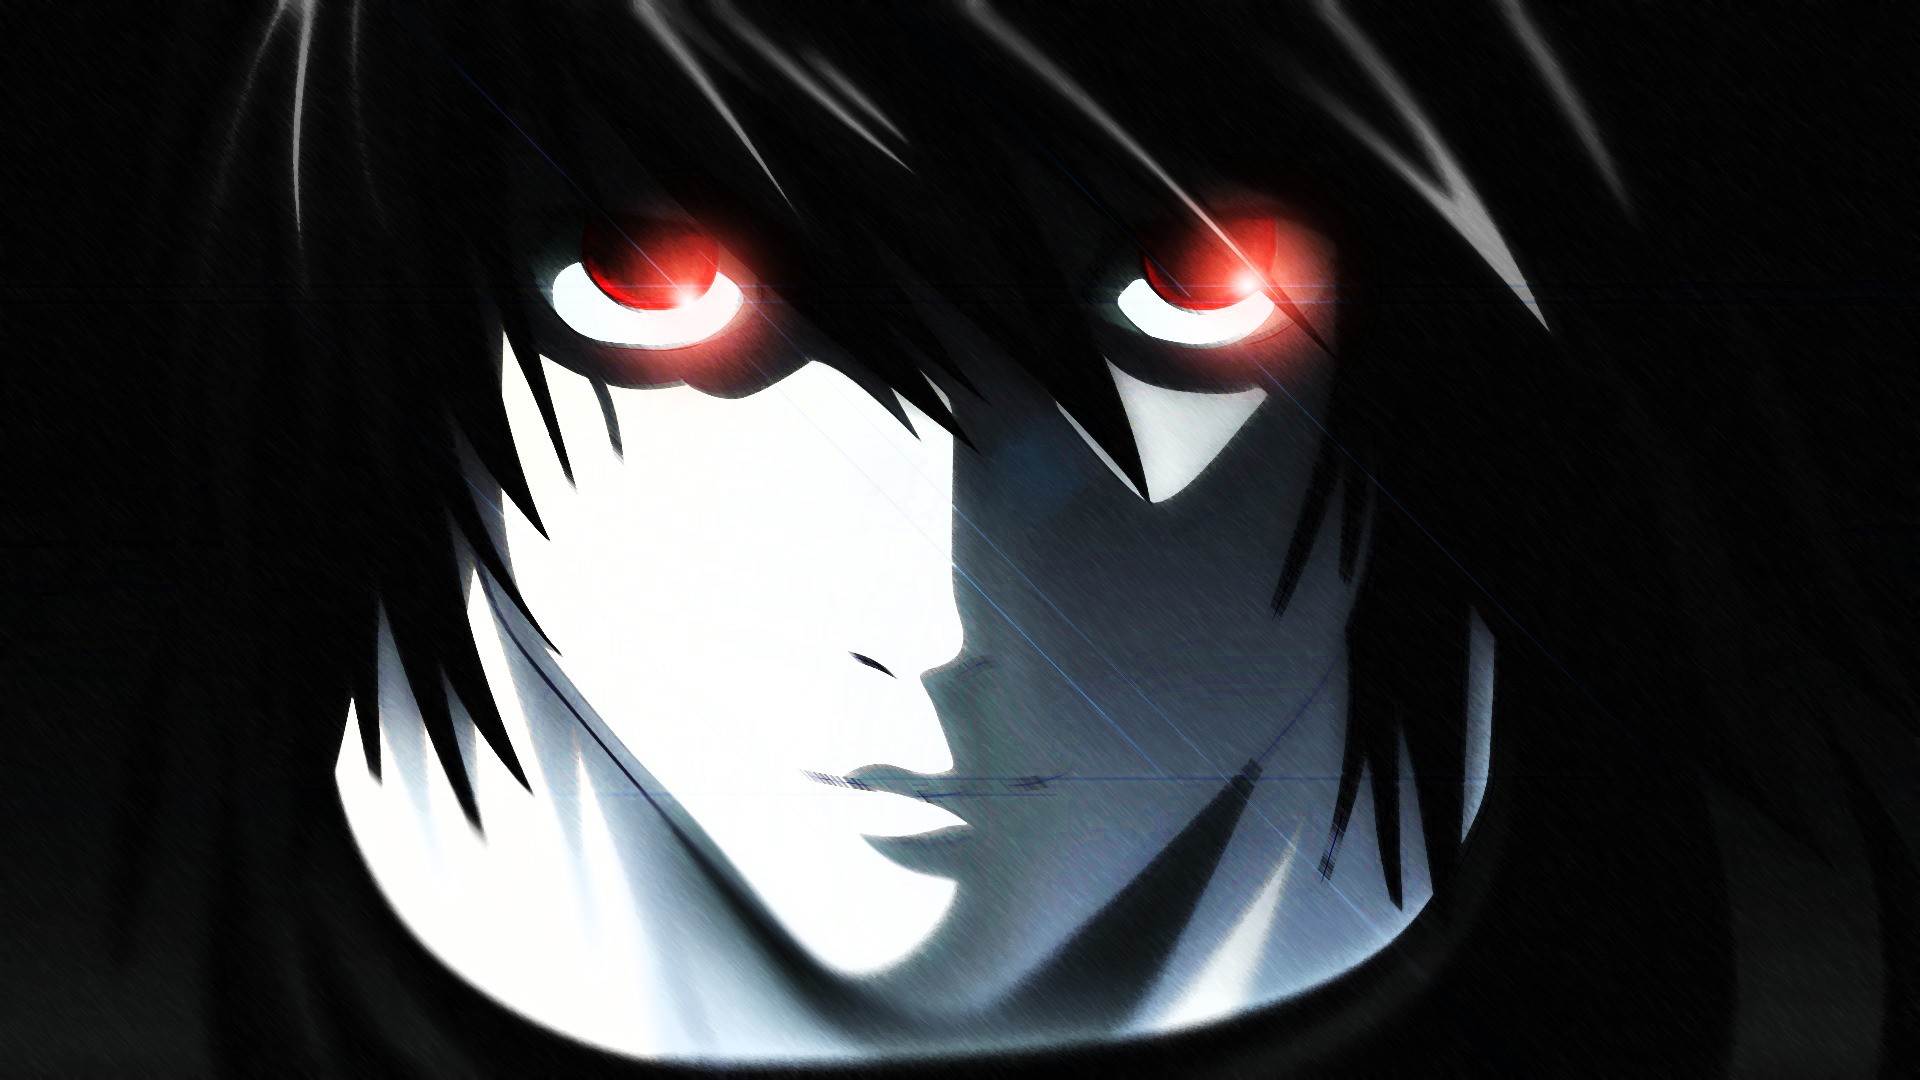 Anime 1920x1080 Lawliet L red eyes anime face closeup glowing eyes black background